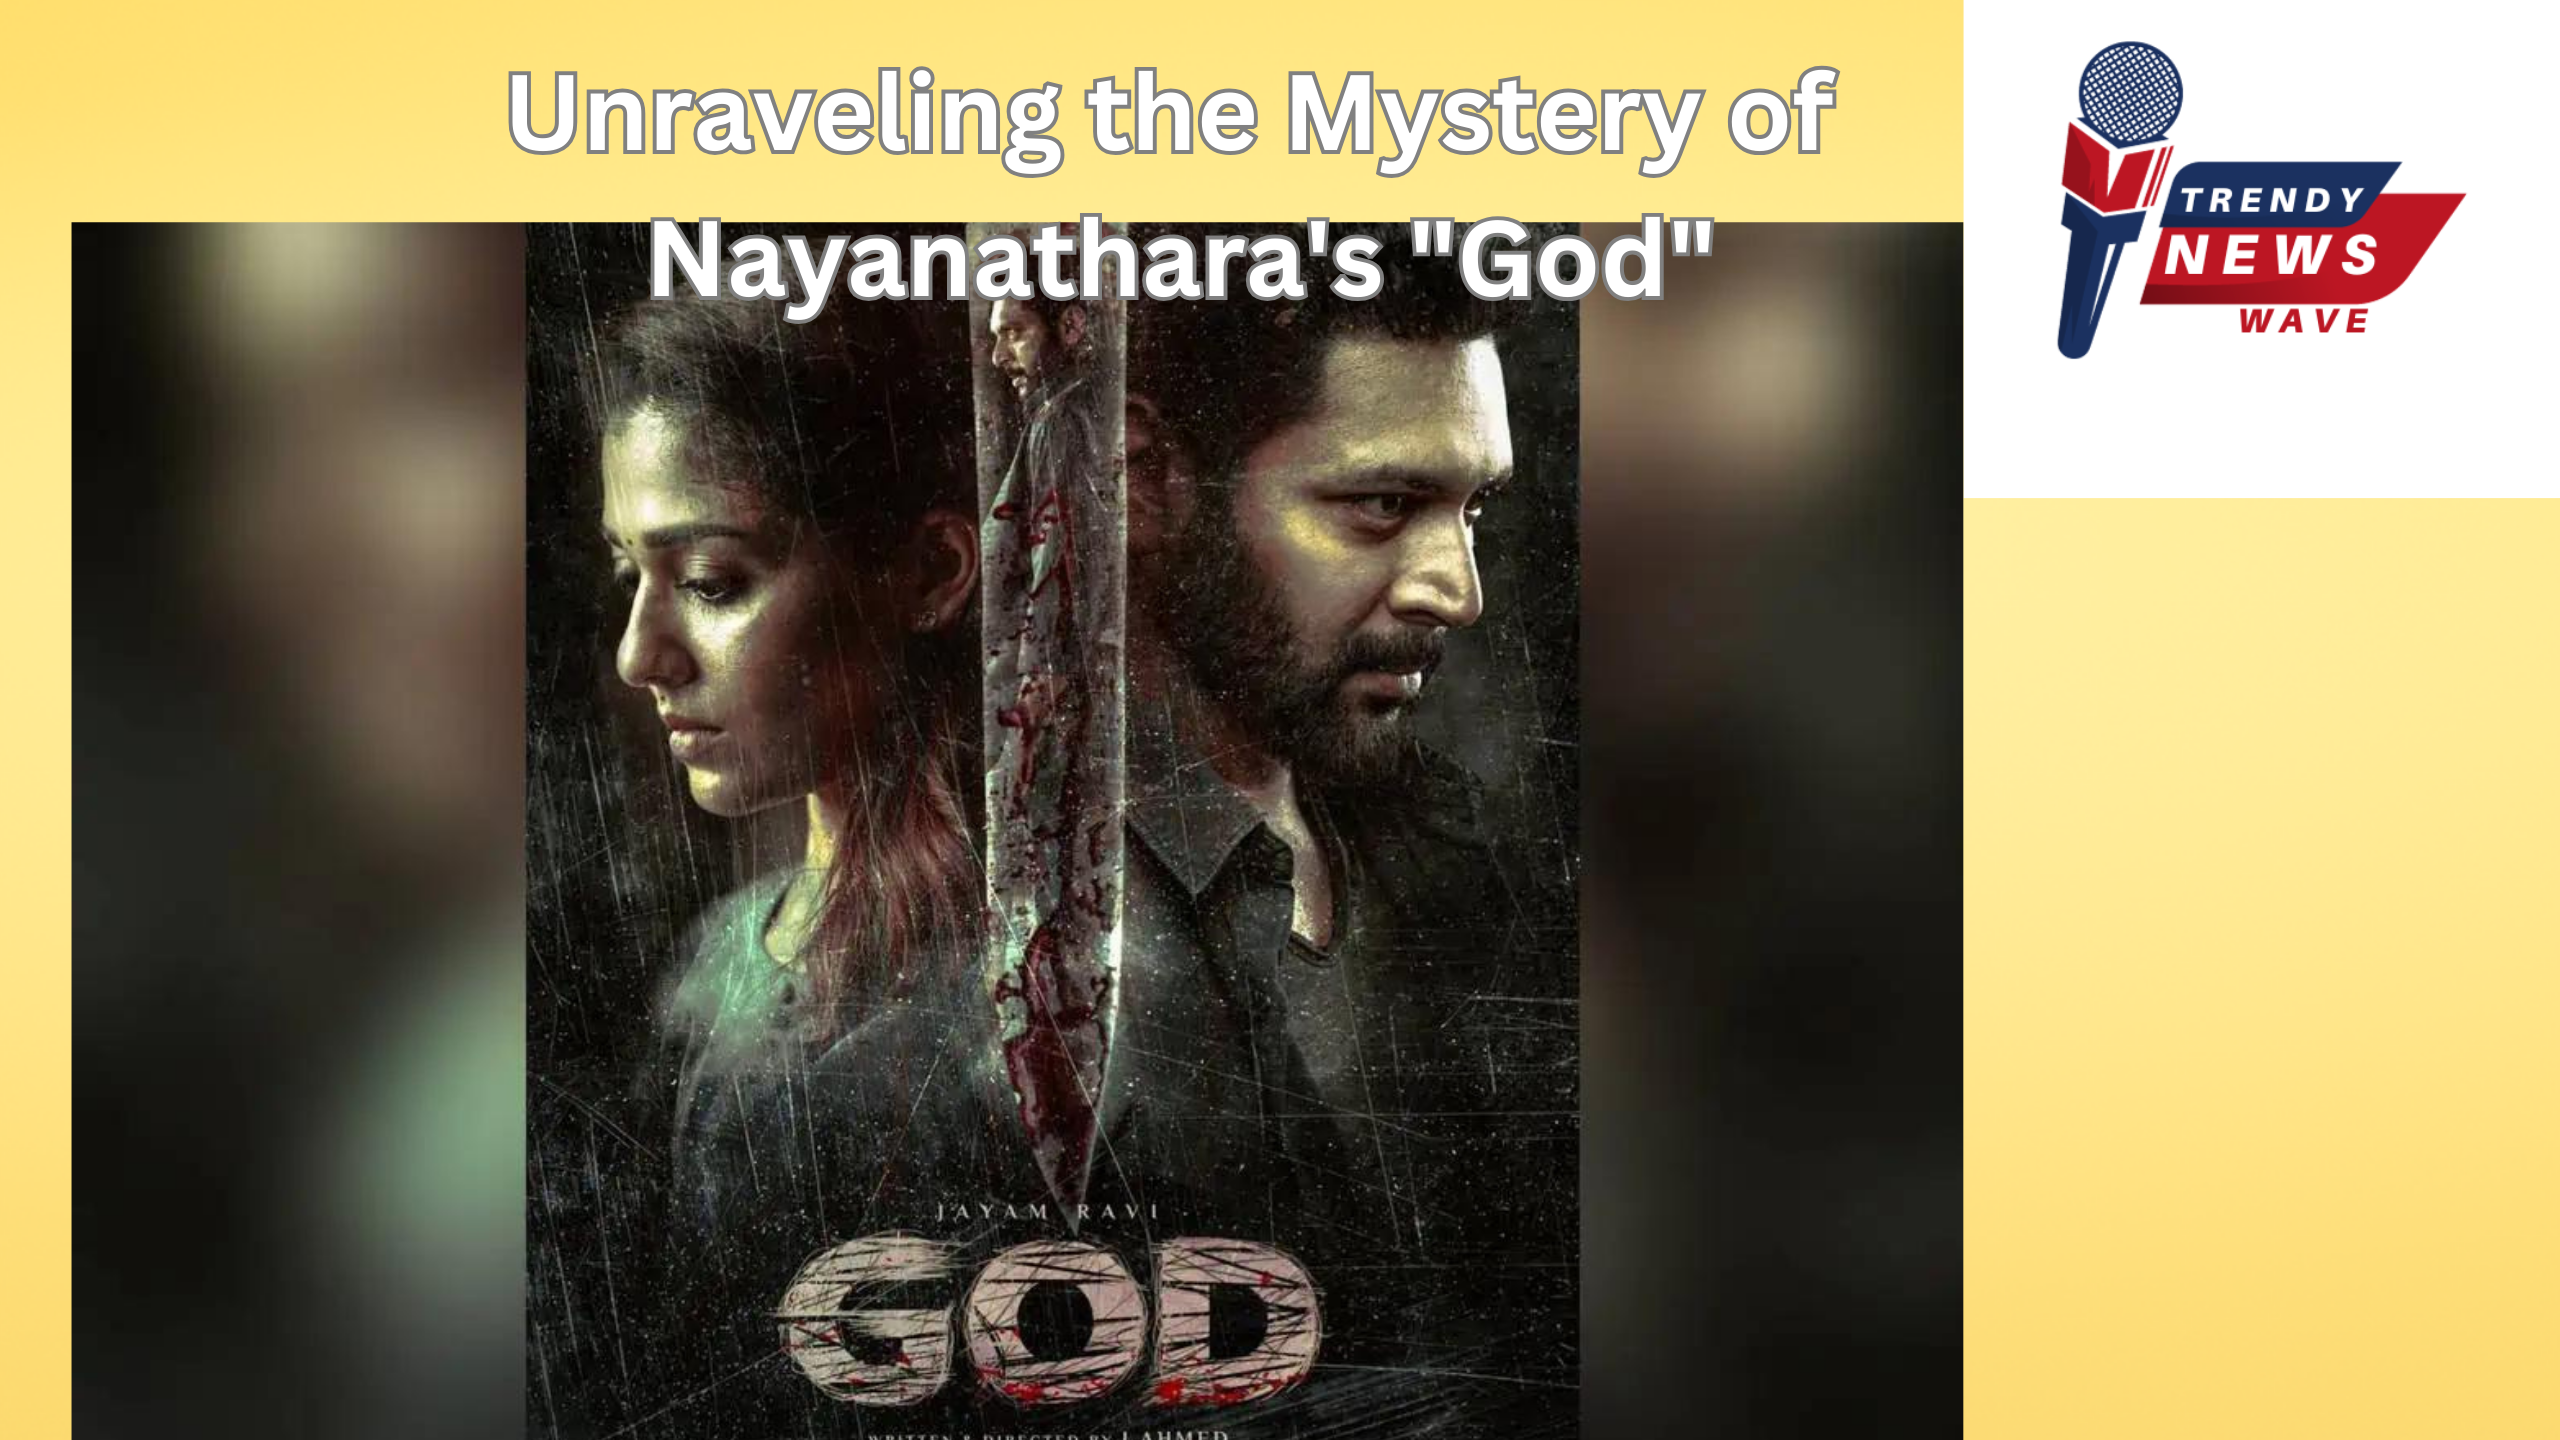 Unraveling the Mystery of Nayanathara's "God"